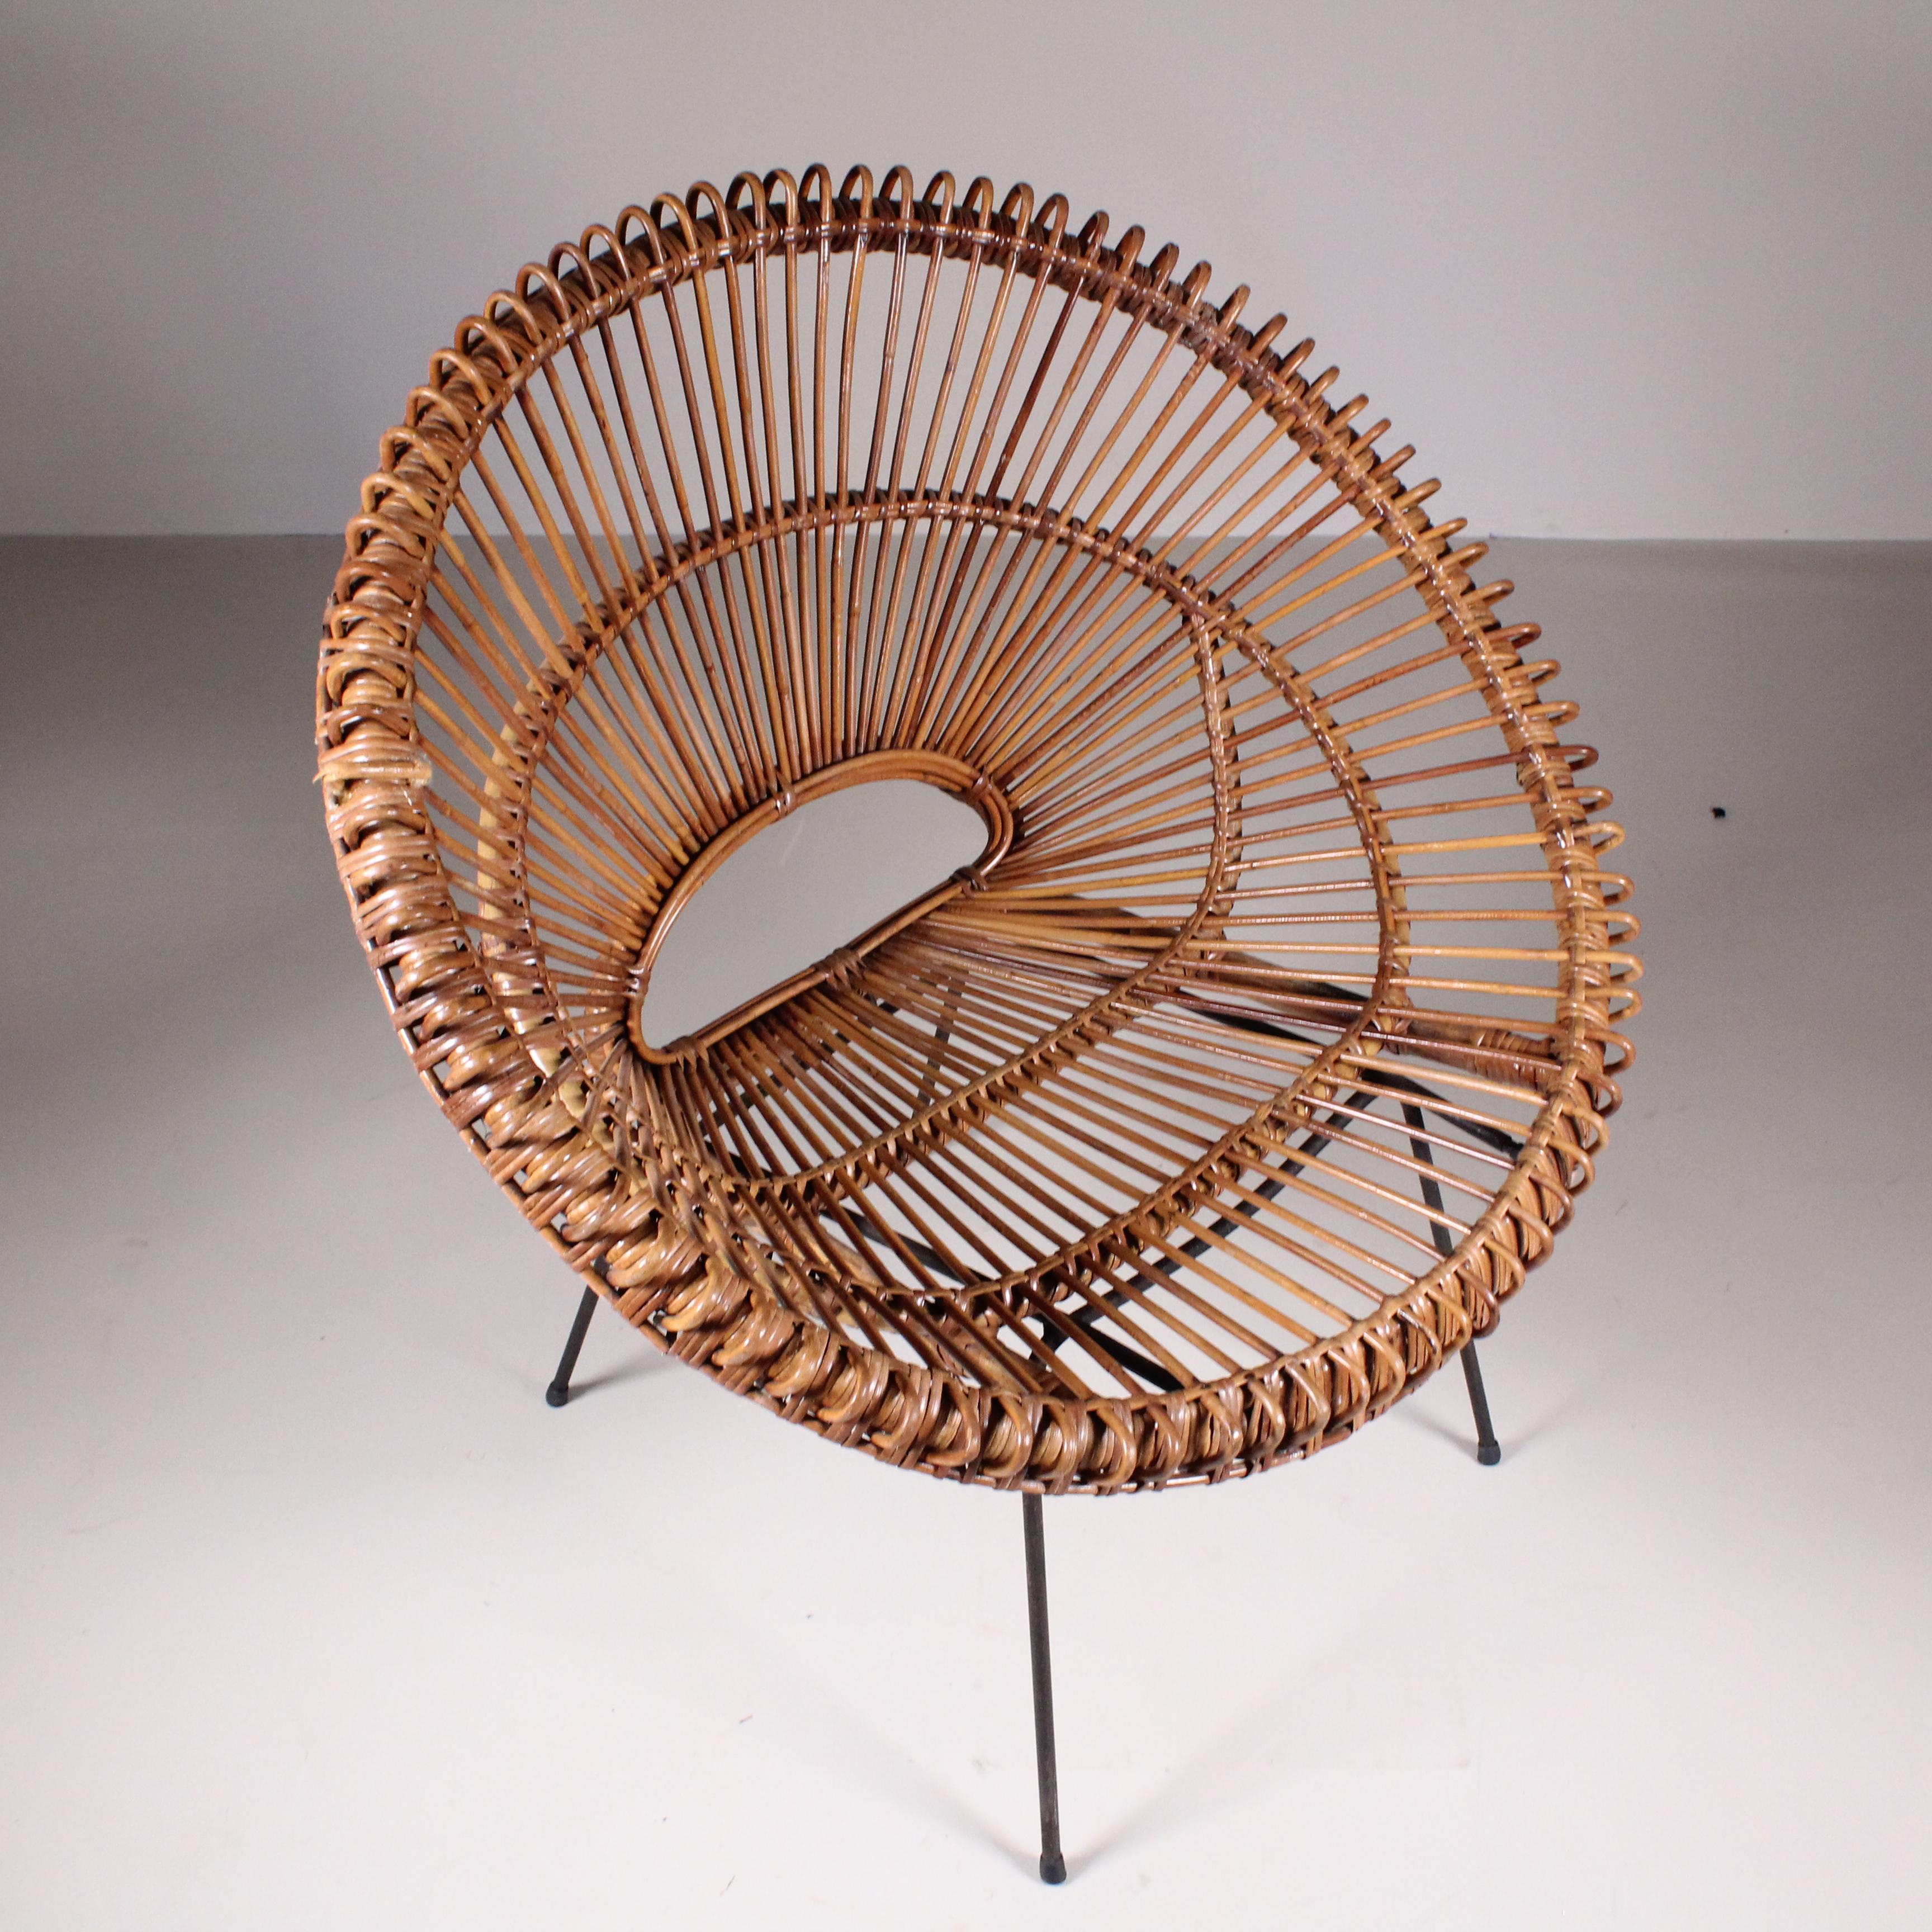 This rattan armchair made in Italy in the 1960s represents an elegant fusion of traditional craftsmanship and modern design. Rattan, a natural and flexible material derived from the palm tree, was often woven by hand to create lightweight and